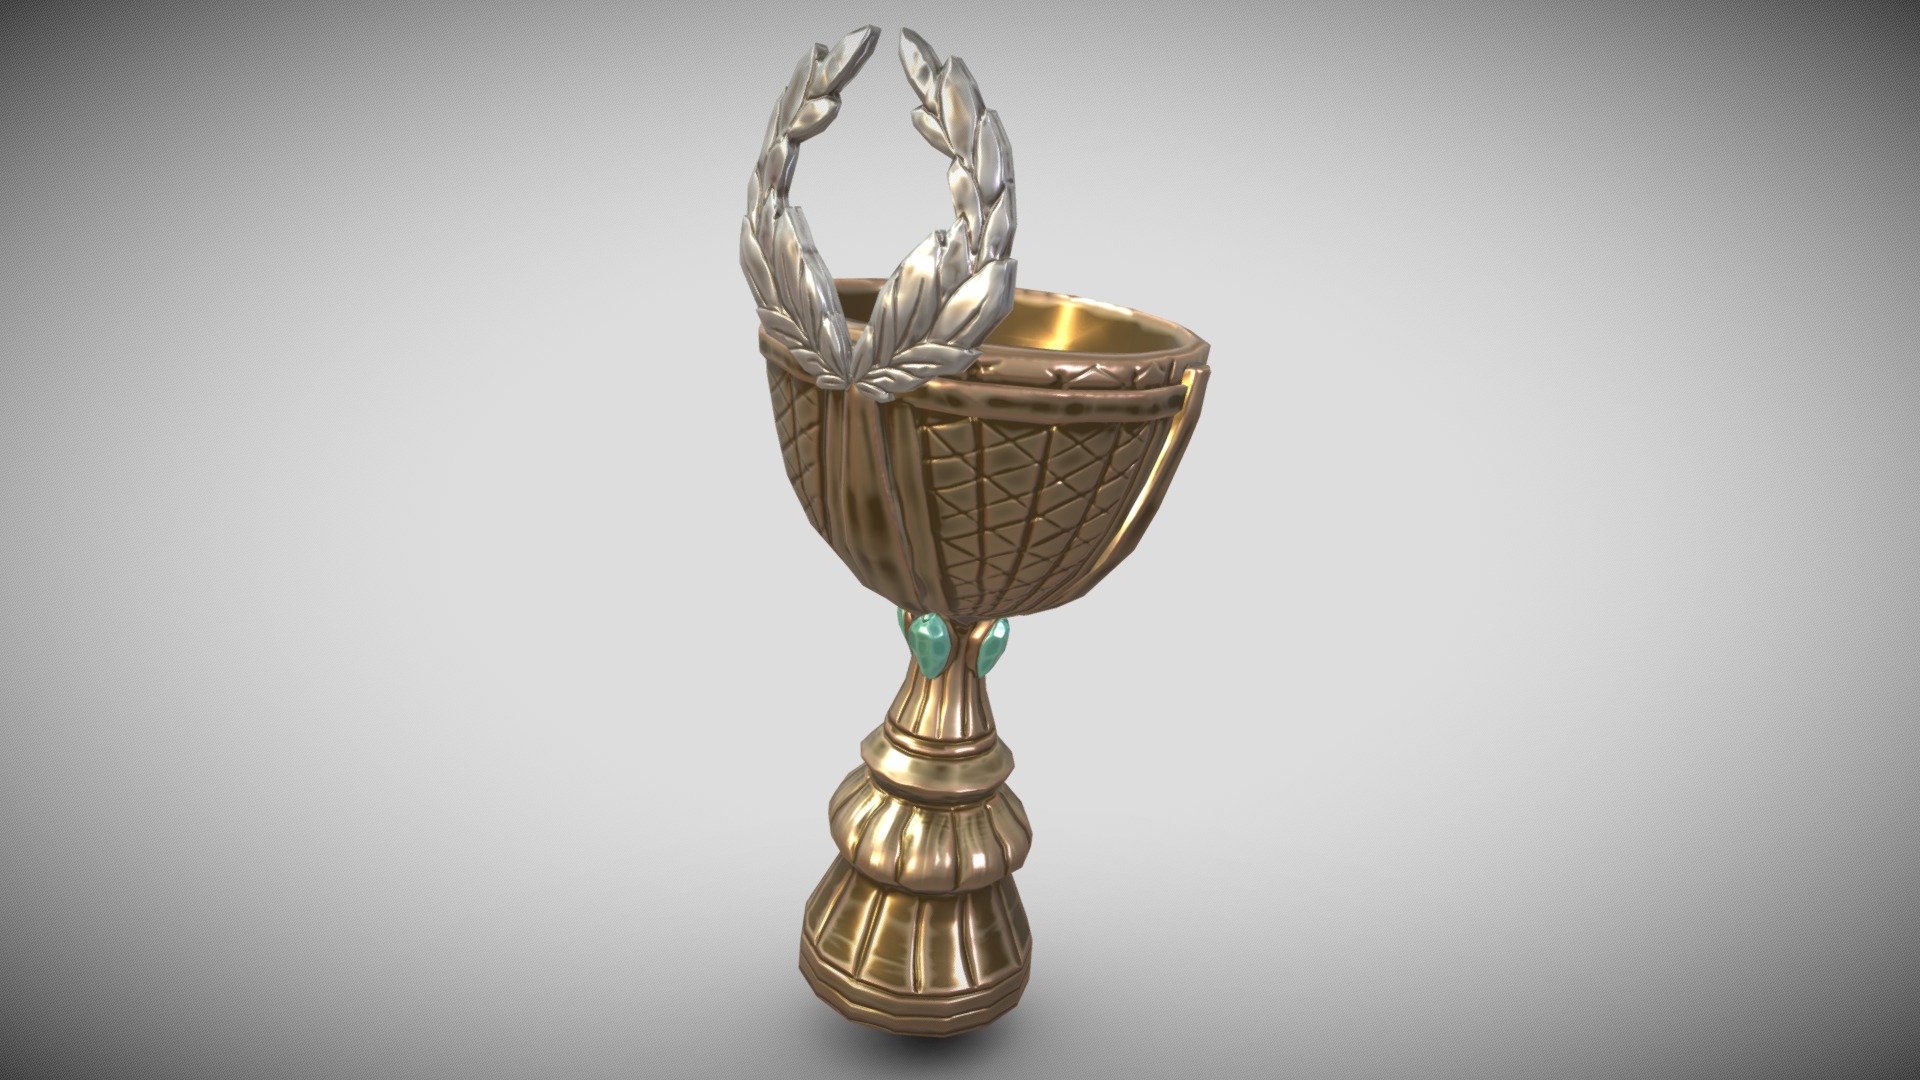 If you need additional work done do not hesitate to contact me, I am currently available for freelance work.

Stylized golden victory goblet for a winner. Turquoise gems decorate the handle of this cup, alongside a silver laurel wreath at the top.
Full retopology and pbr colored.

1218 Vertices

Highpoly sculpted in Nomadsculpt.

Lowpoly made in Blender

Highpoly and Lowpoly-model are in a Blend-file included in additional file with embedded materials 3d model